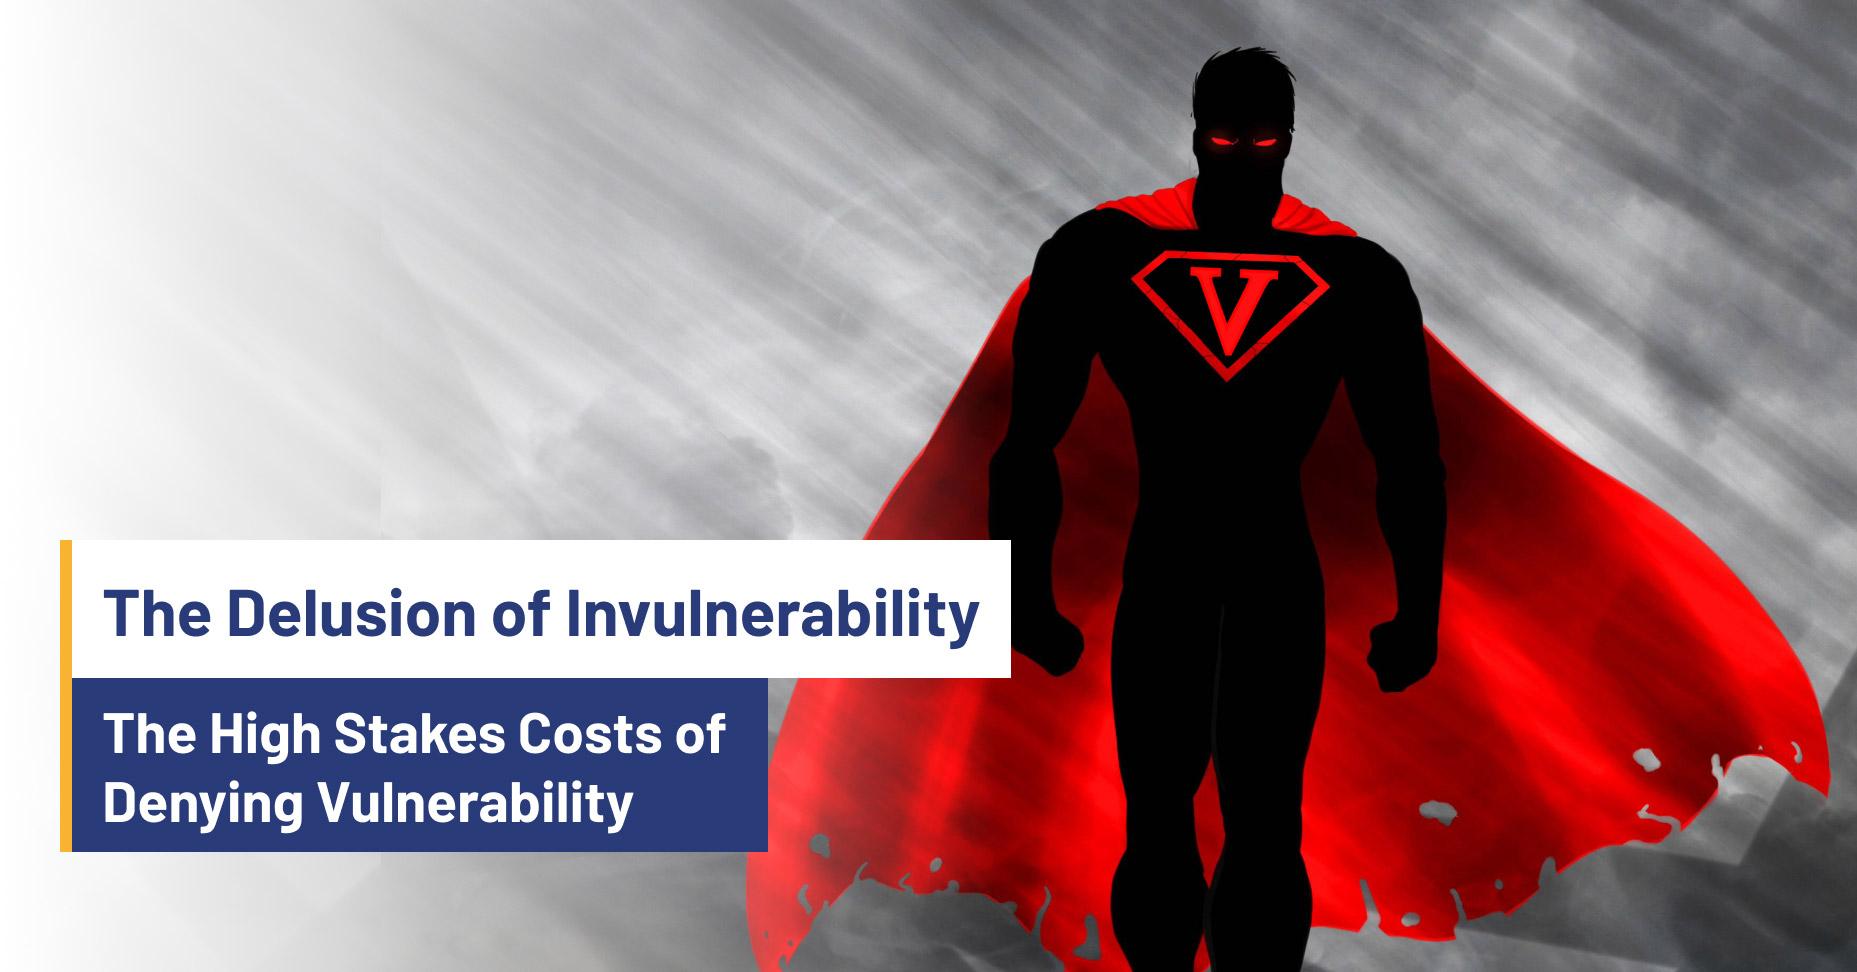 The Delusion of Invulnerability: The High Stakes Costs of Denying Vulnerability